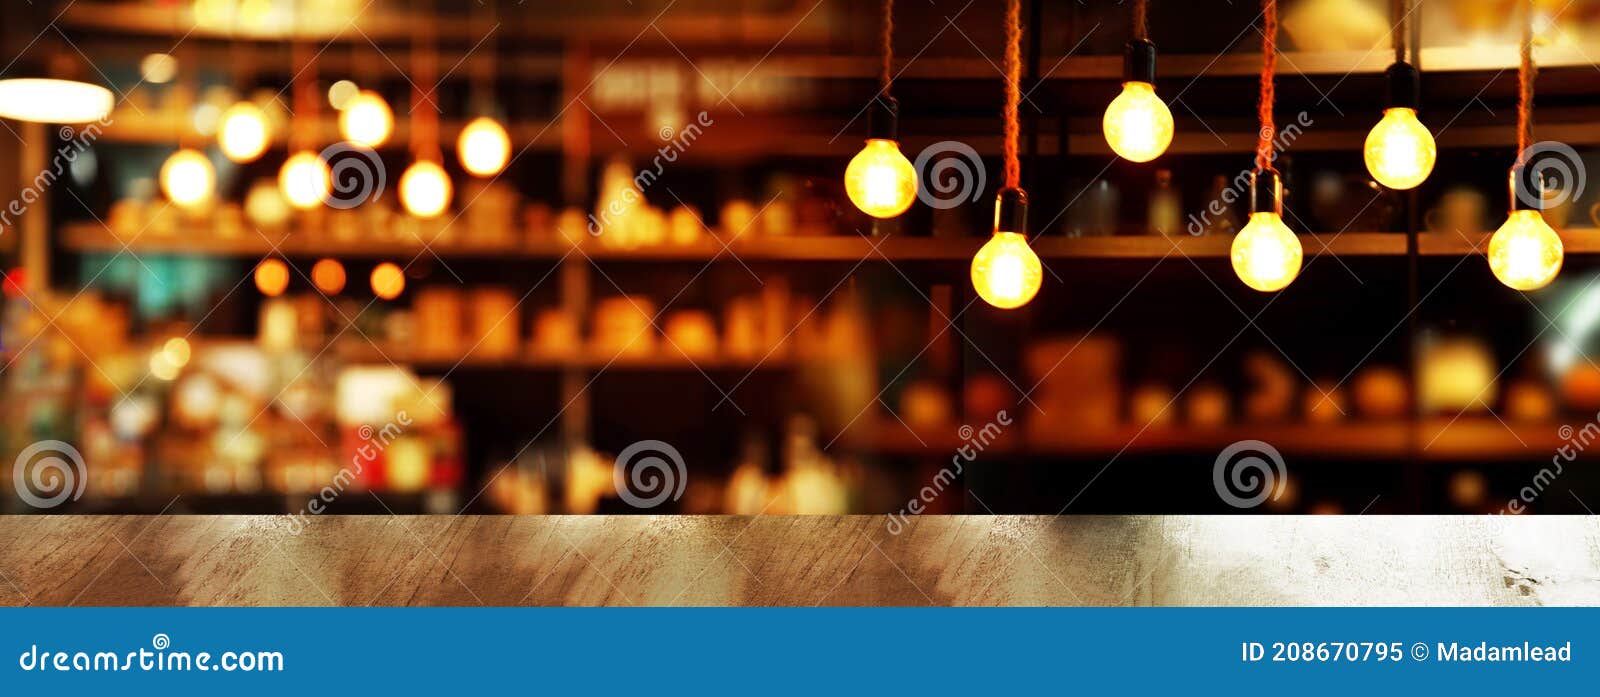 Top of Wood Table with Lamp Light of Bar or Pub in Dark Night Party  Background Stock Image - Image of lamp, illuminated: 208670795